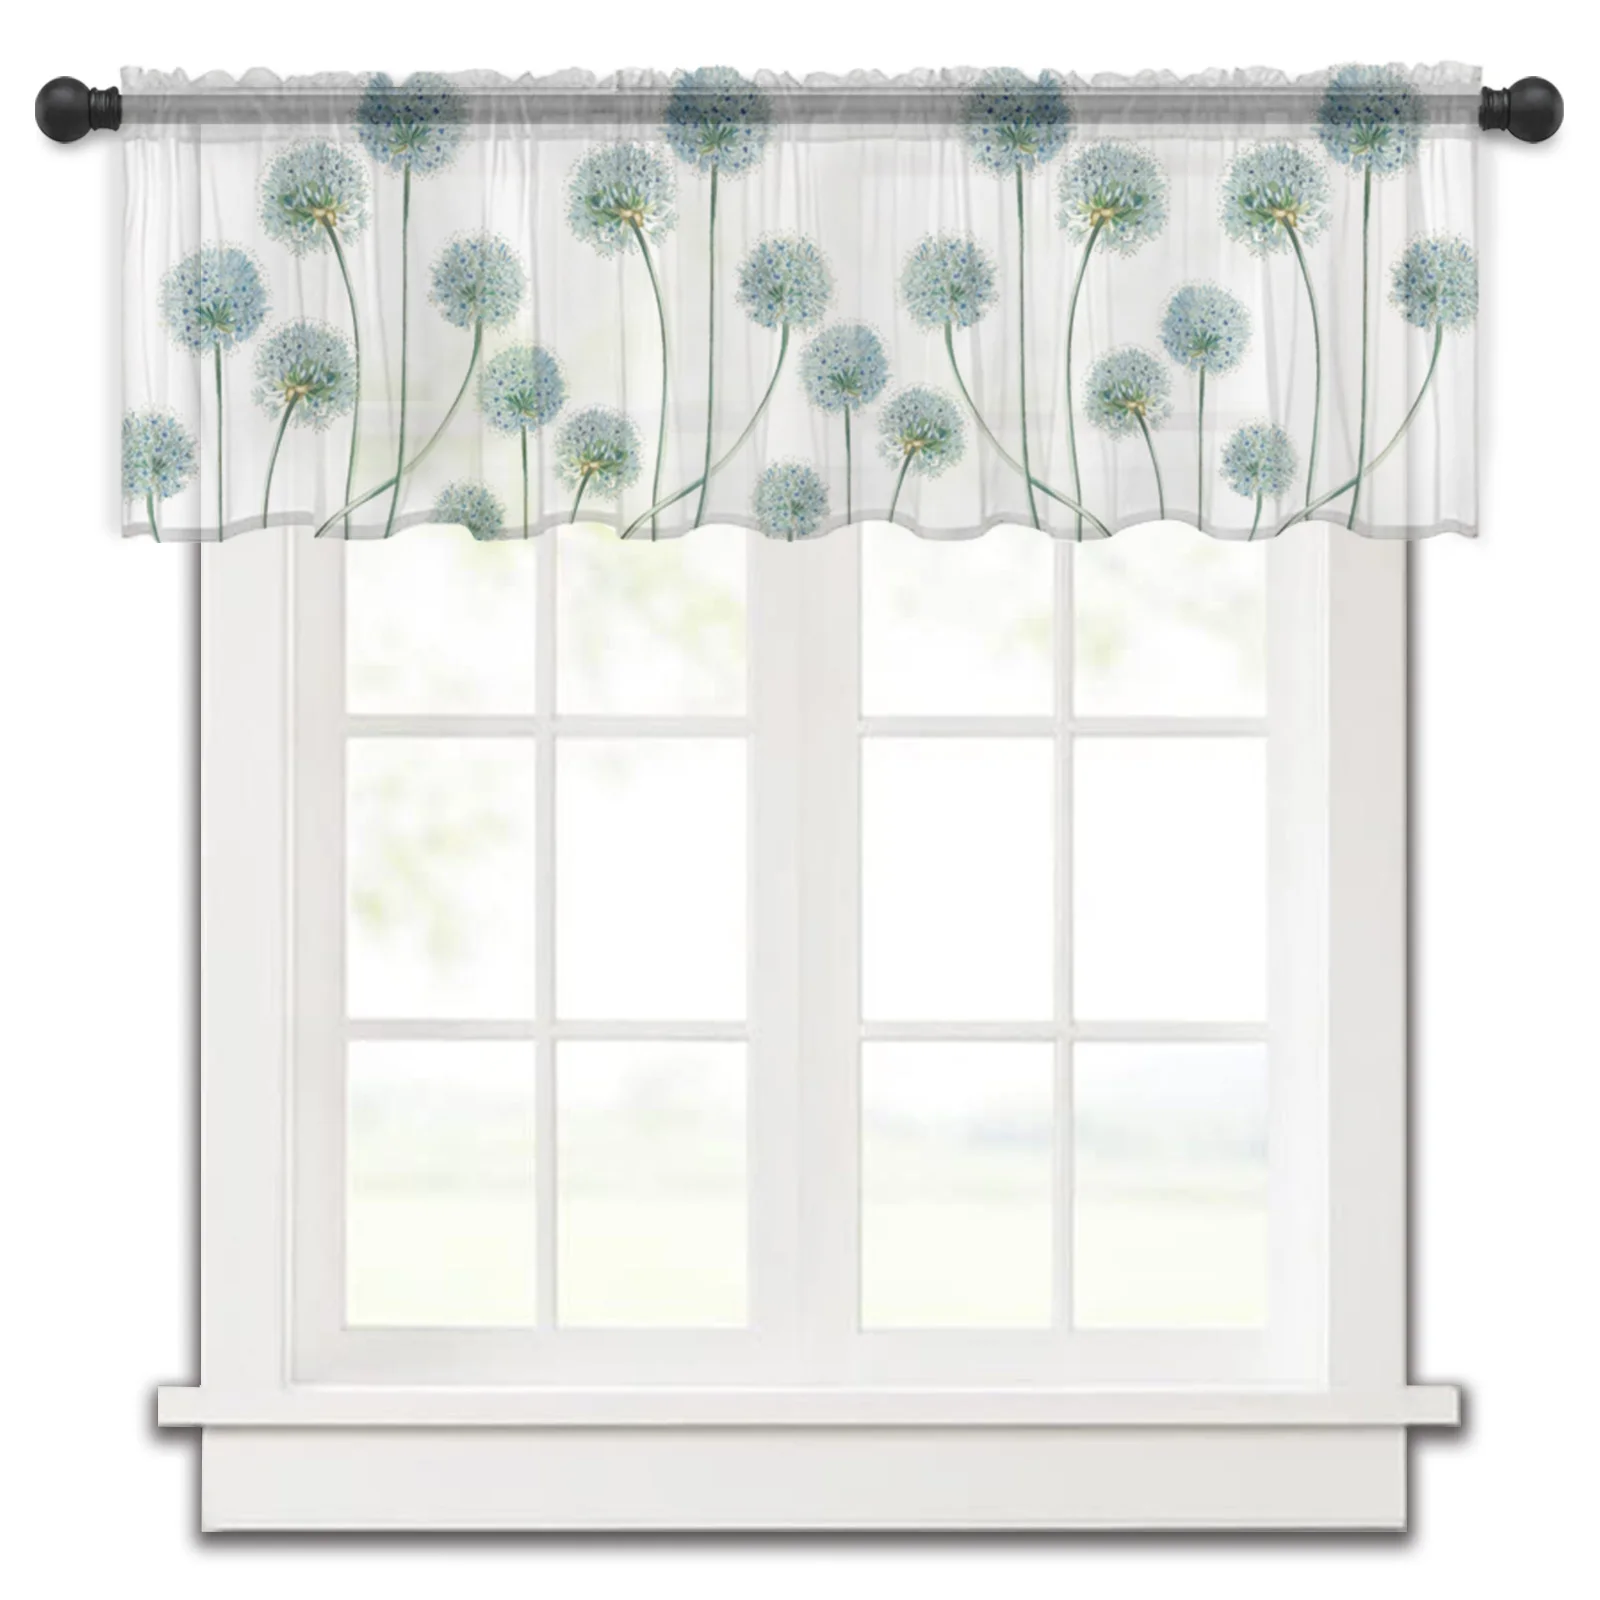 

Dandelion Retro Flower Plant Kitchen Small Window Curtain Tulle Sheer Short Curtain Bedroom Living Room Home Decor Voile Drapes